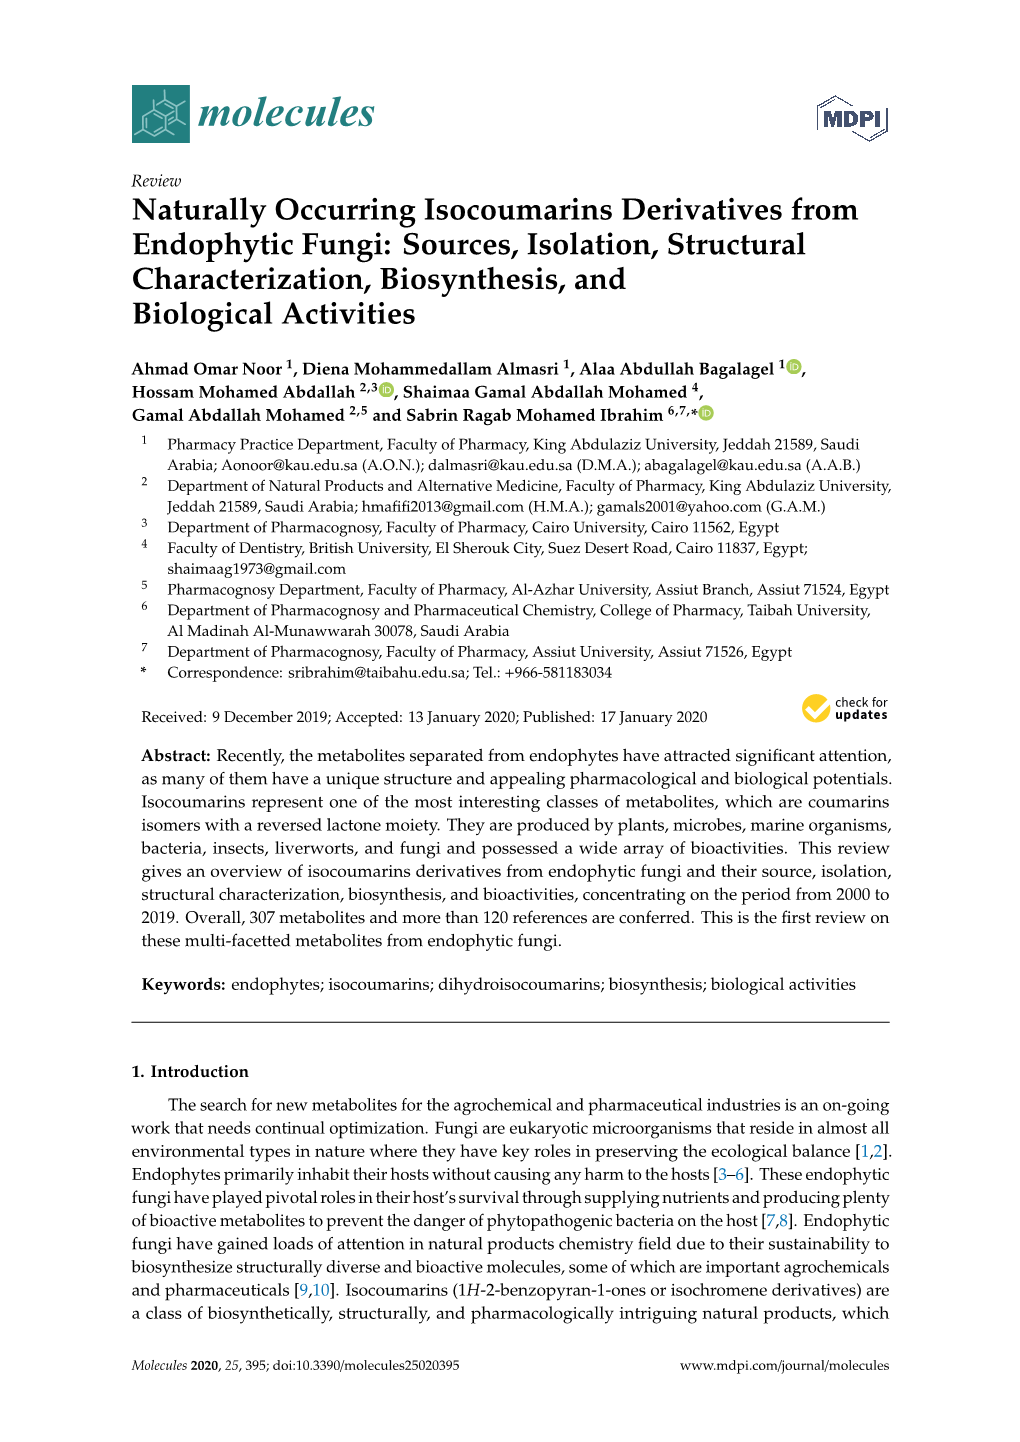 Naturally Occurring Isocoumarins Derivatives from Endophytic Fungi: Sources, Isolation, Structural Characterization, Biosynthesis, and Biological Activities